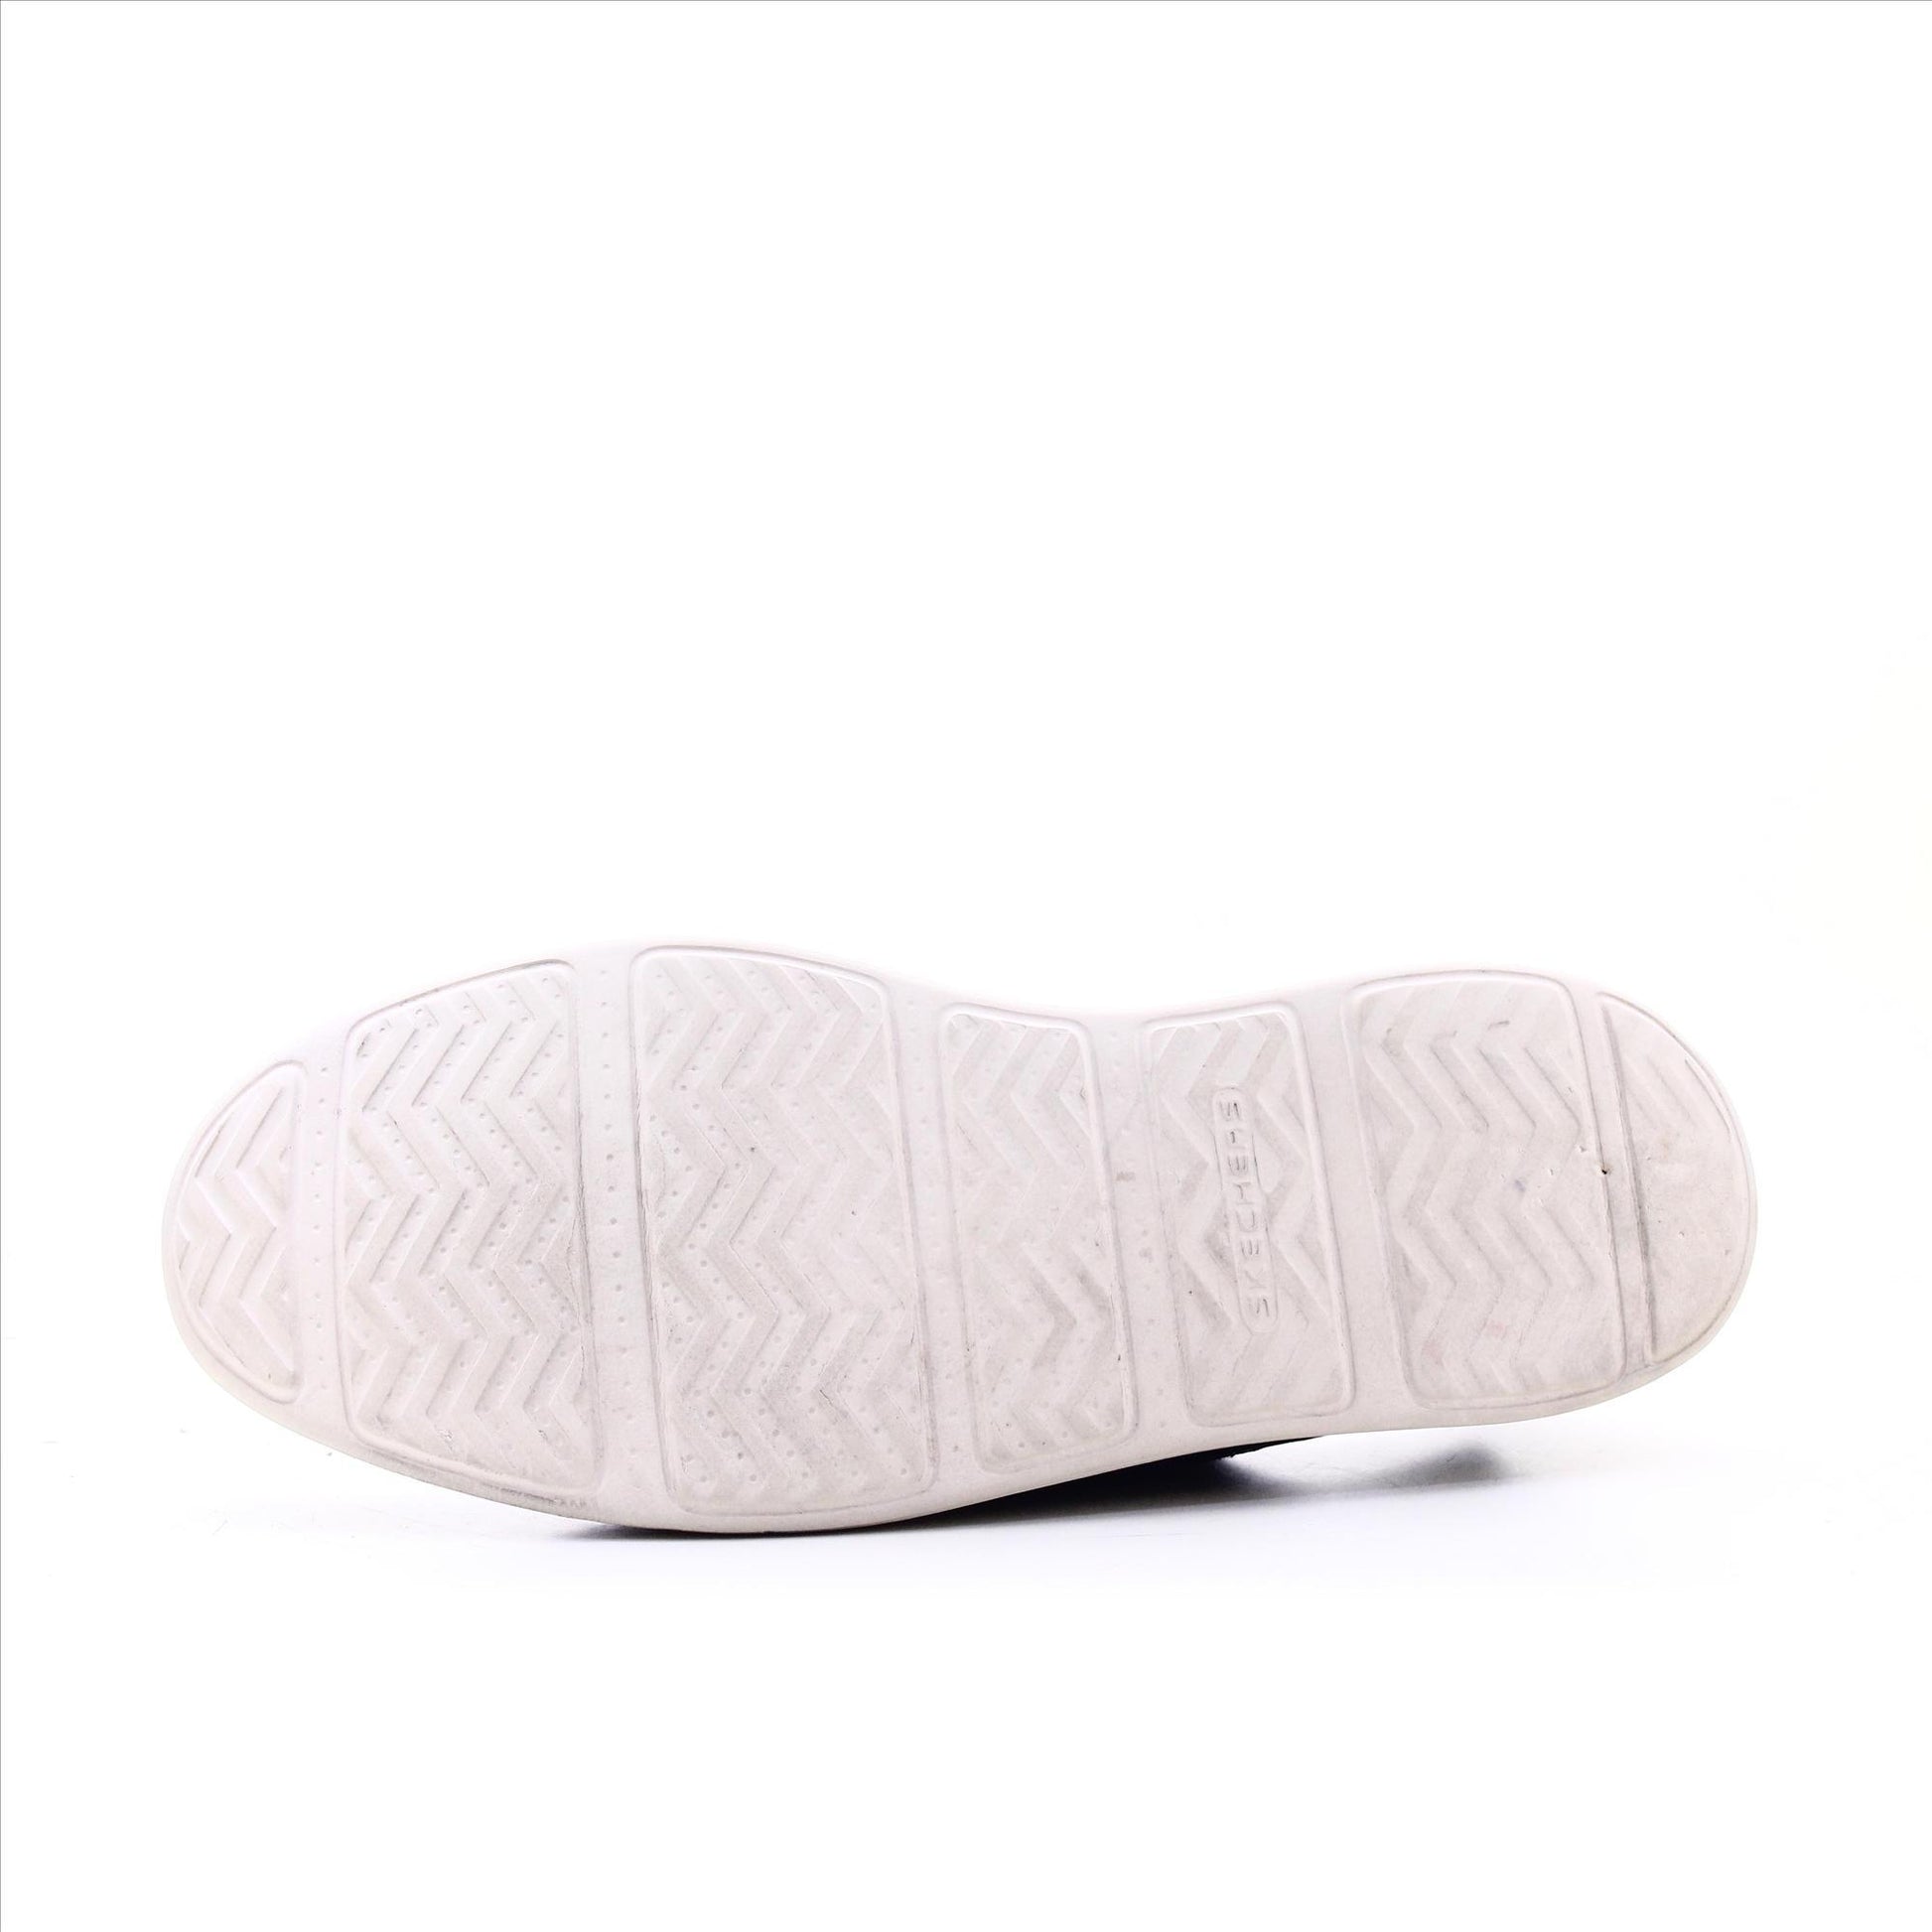 Skechers Relaxed Fit Air Cooled Memory Foam